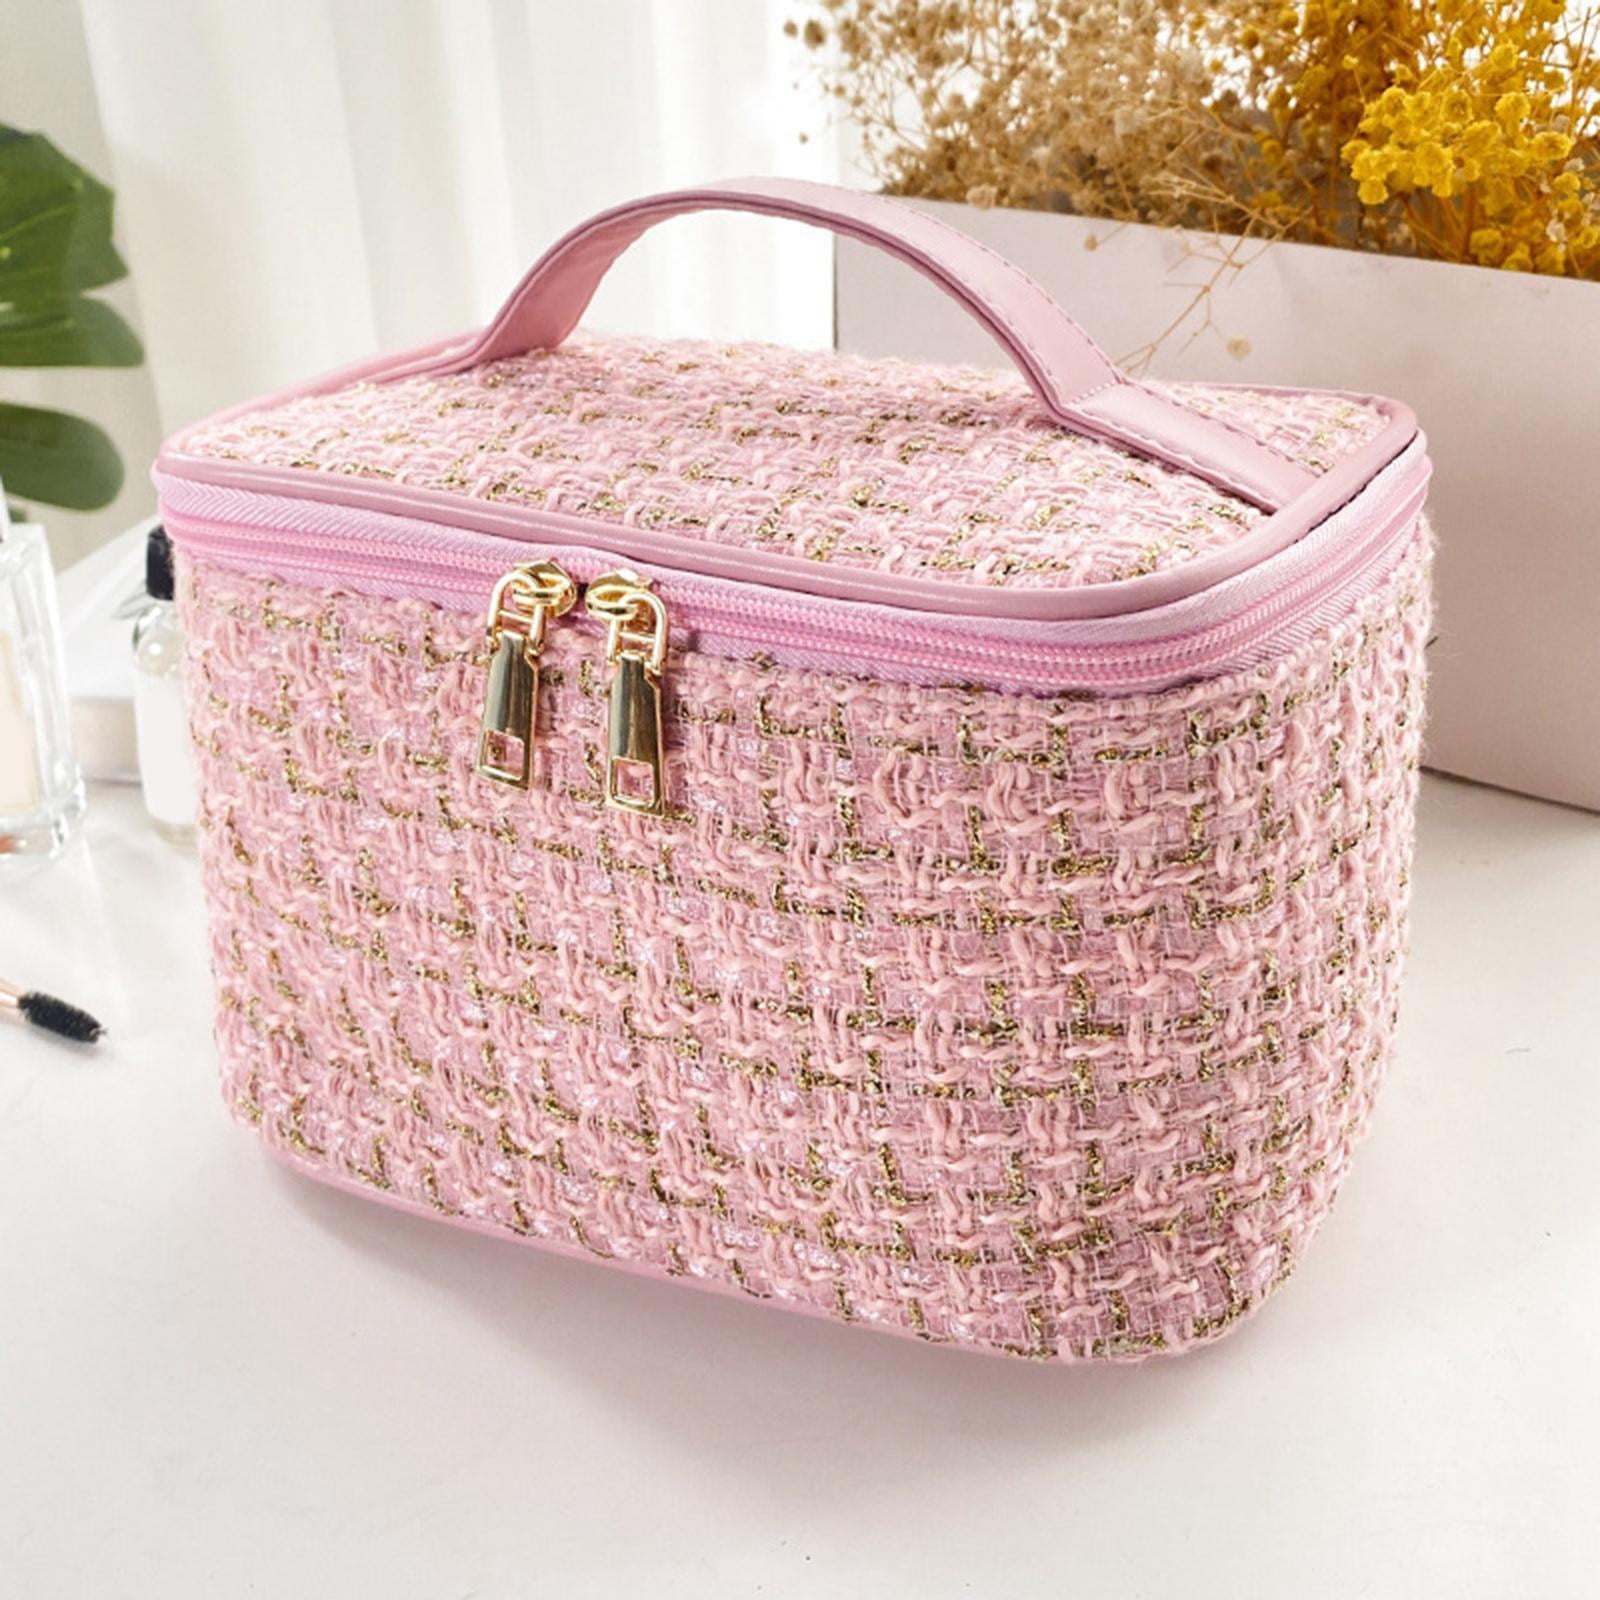 Felt Cloth Insert Bag Organizer Makeup Bucket Organizer Travel Inner Purse  Portable Classic Portable Makeup Bag Cosmetic Make Up Accessories Tote Bag  For Teen Girls Women College Students Rookies & White-collar Workers